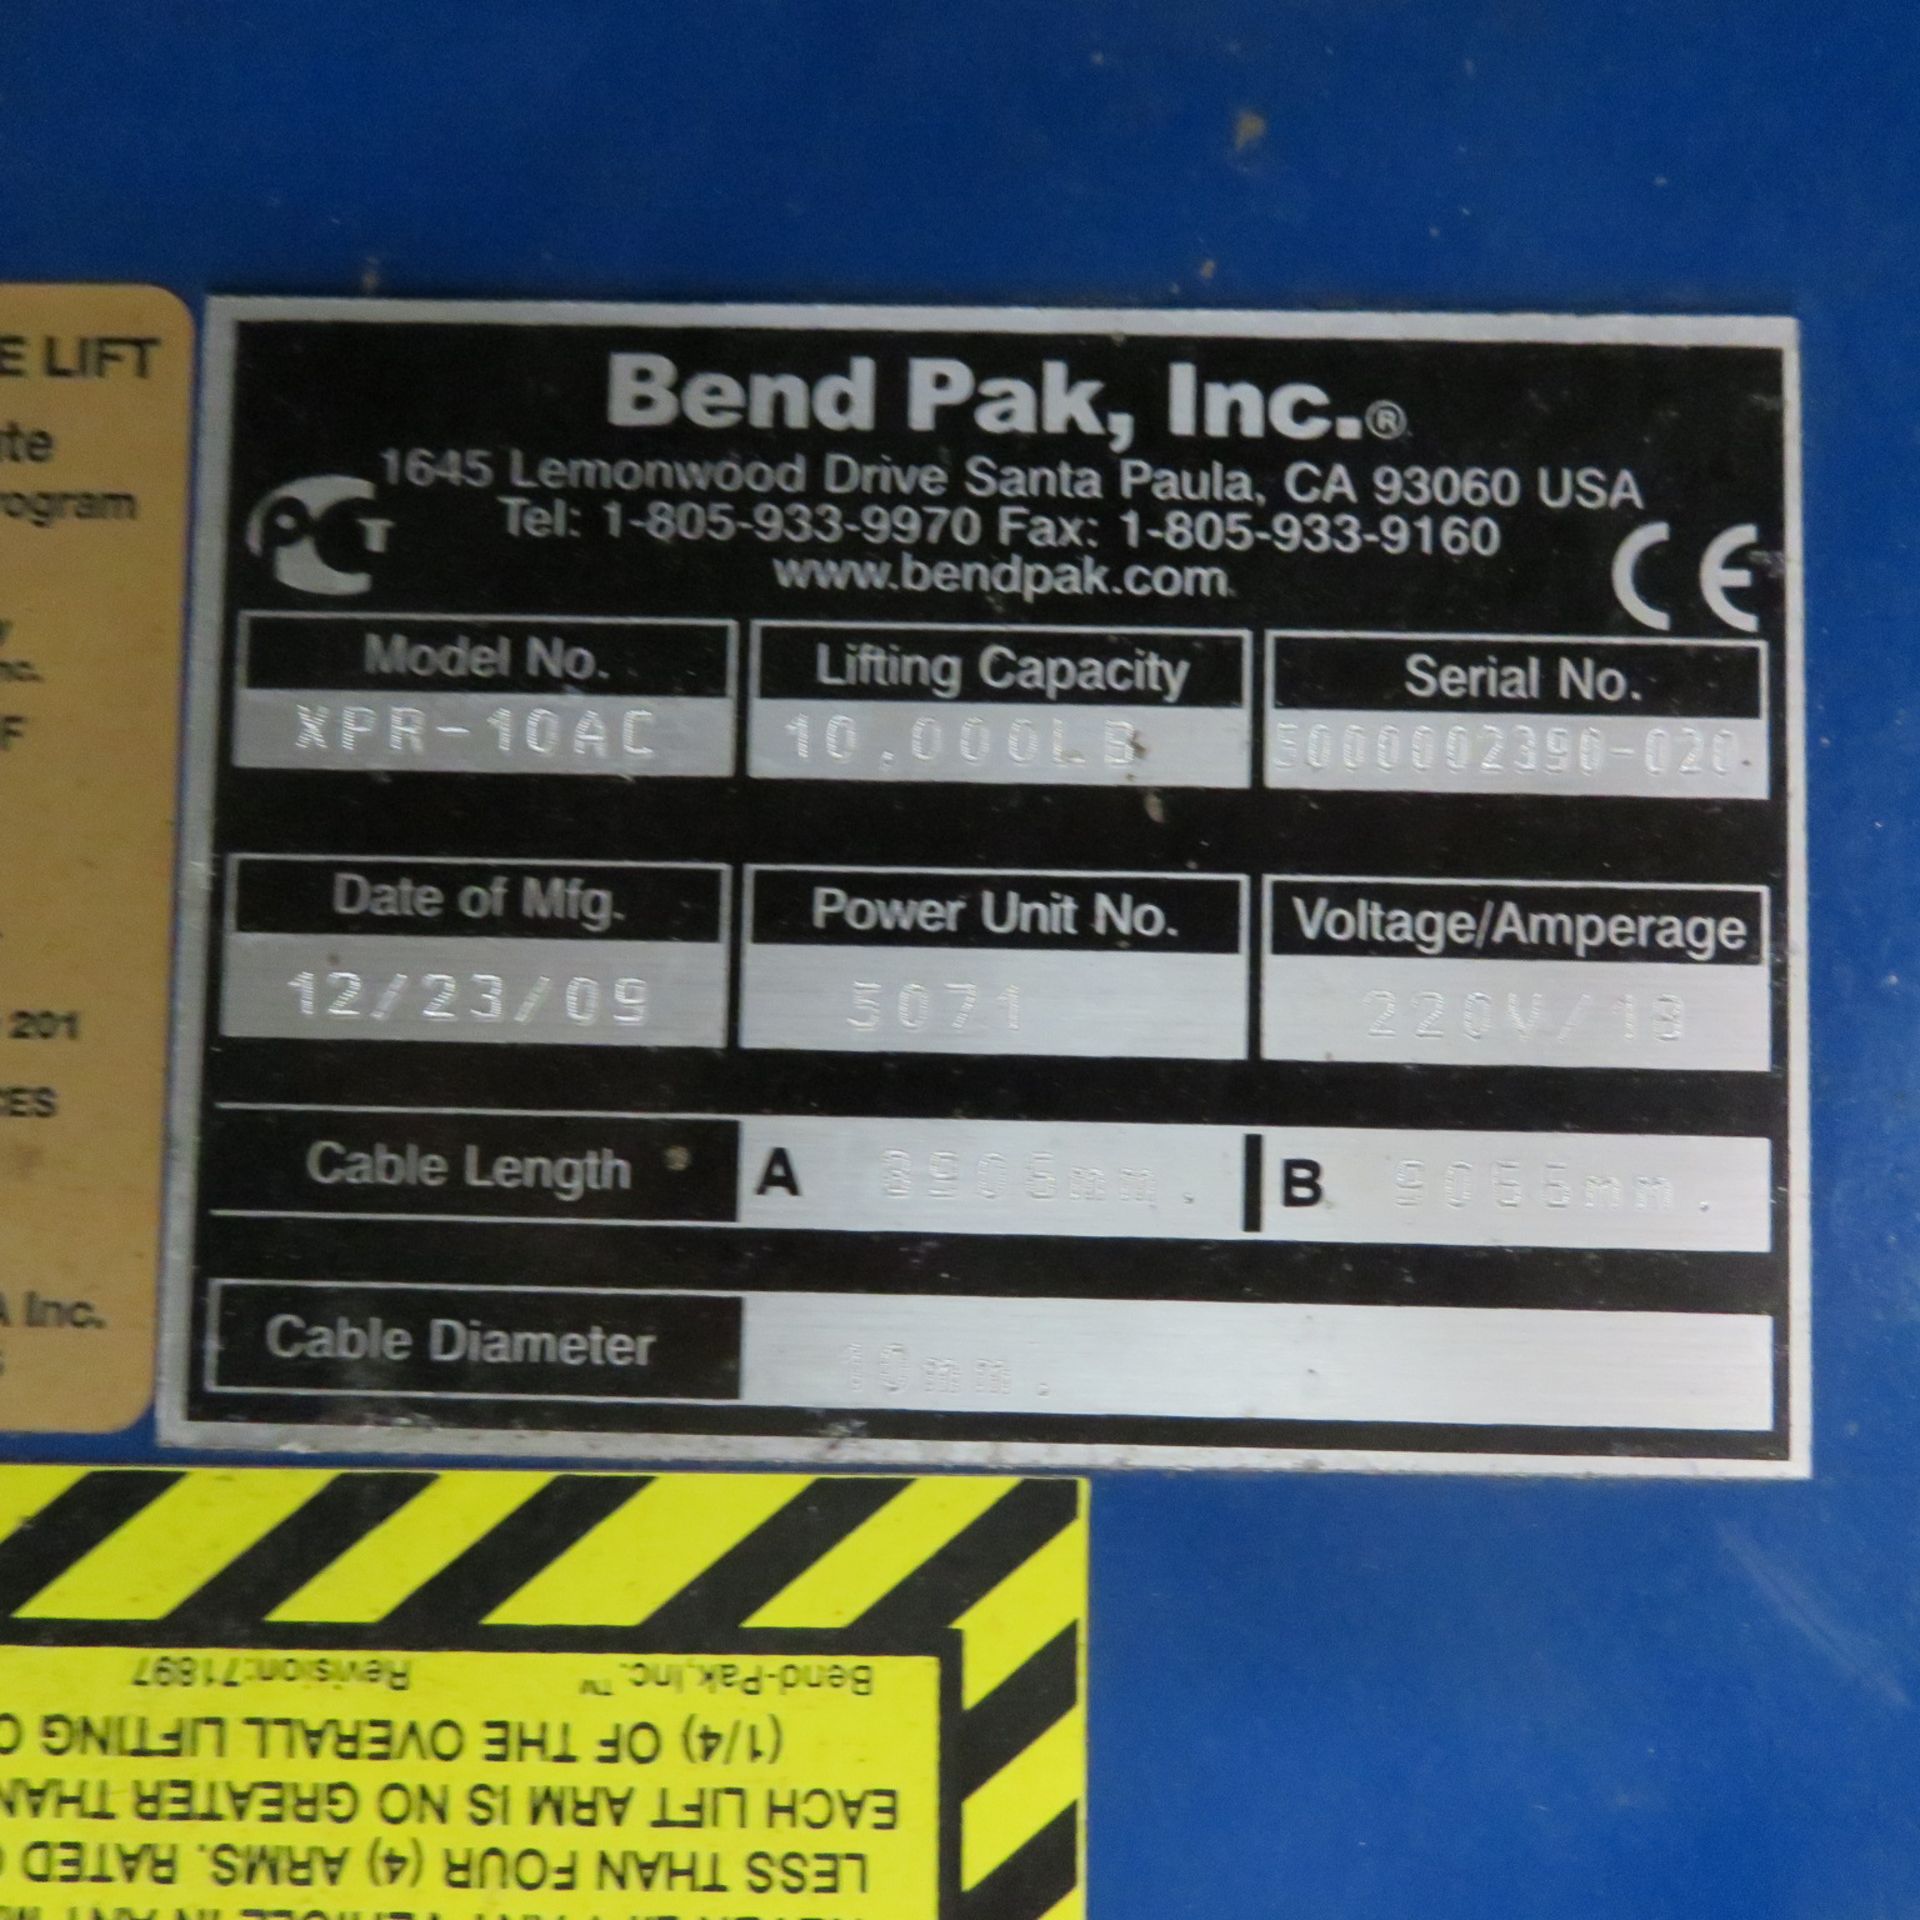 BEND PAK #XPR10AC ASYMETRIC 10,000LBS CAPACITY 2 POST LIFT - Image 2 of 2